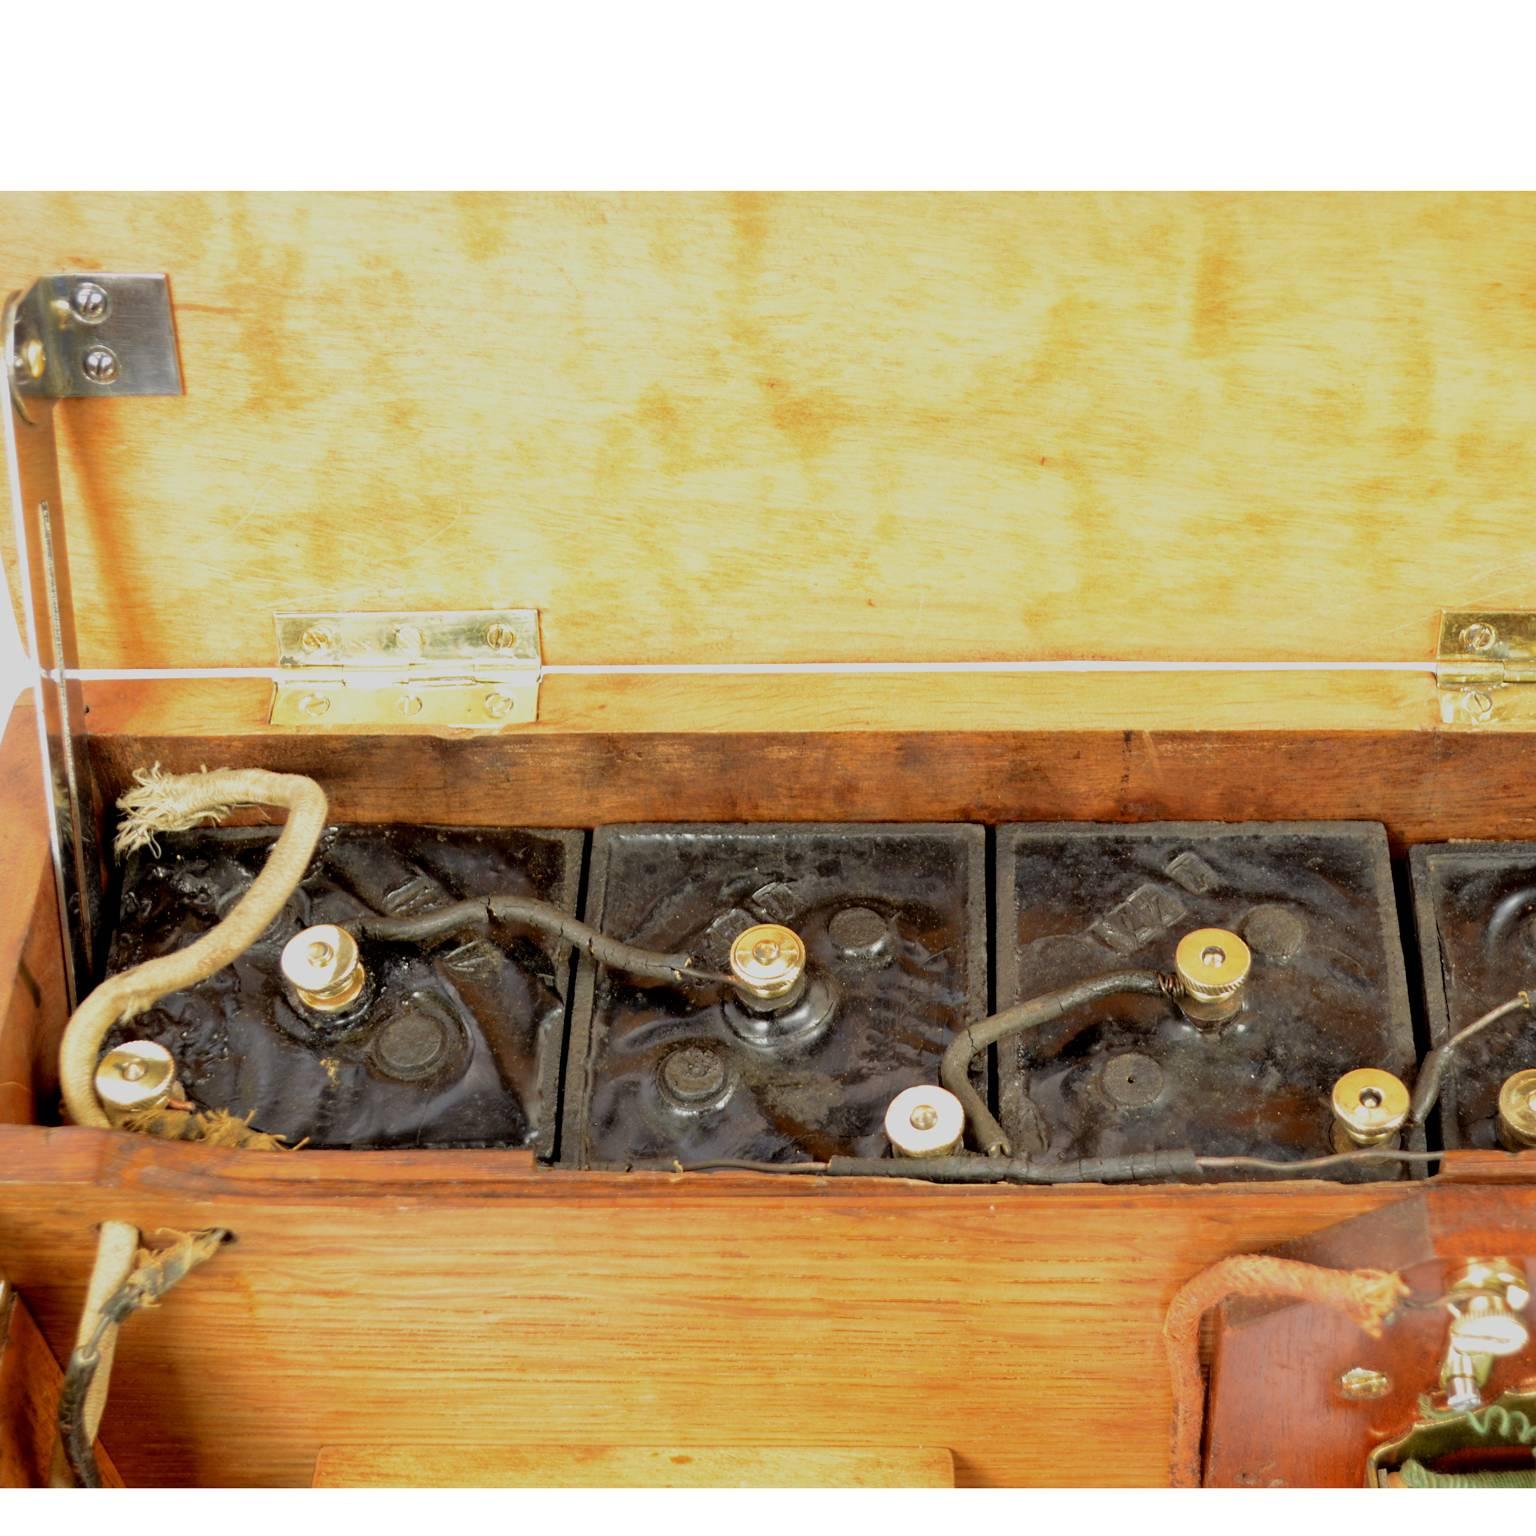 Telegraph power supply in its Oakwood Box of the Second Half of the 19th Century 4